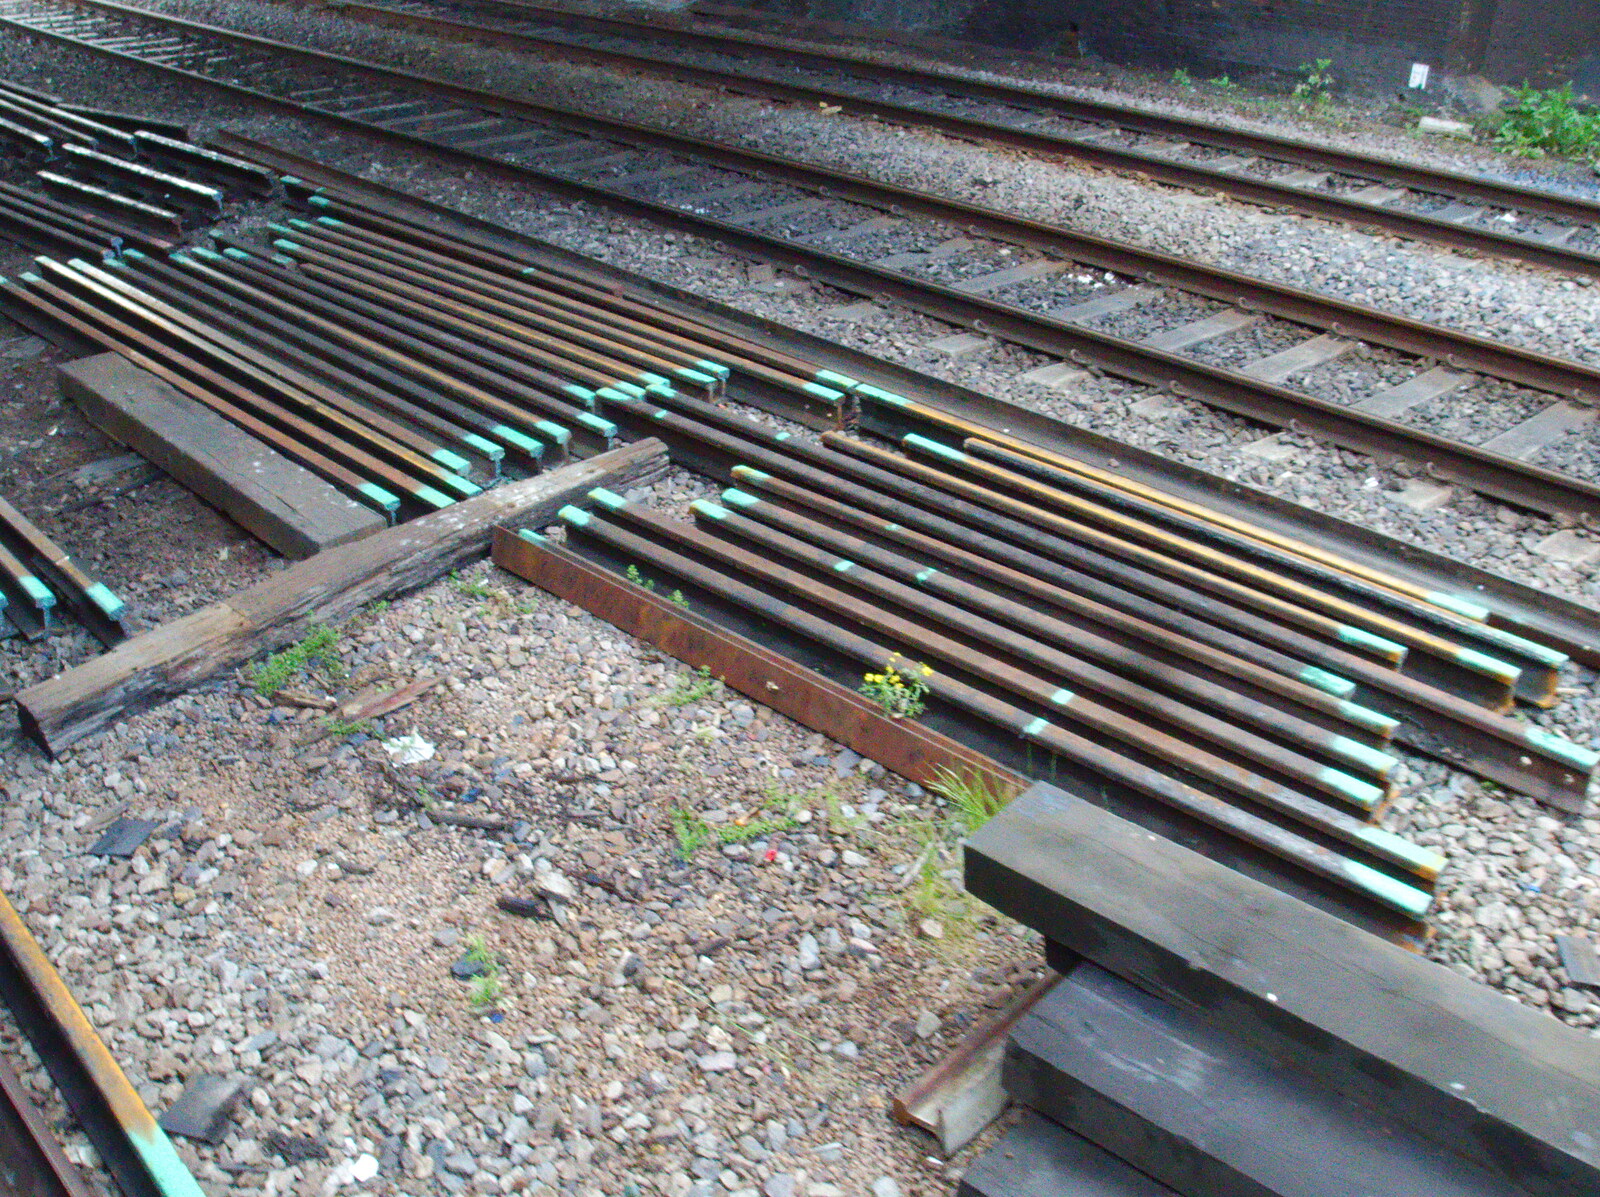 More slices of track by the railway line from A May Miscellany, London - 8th May 2014